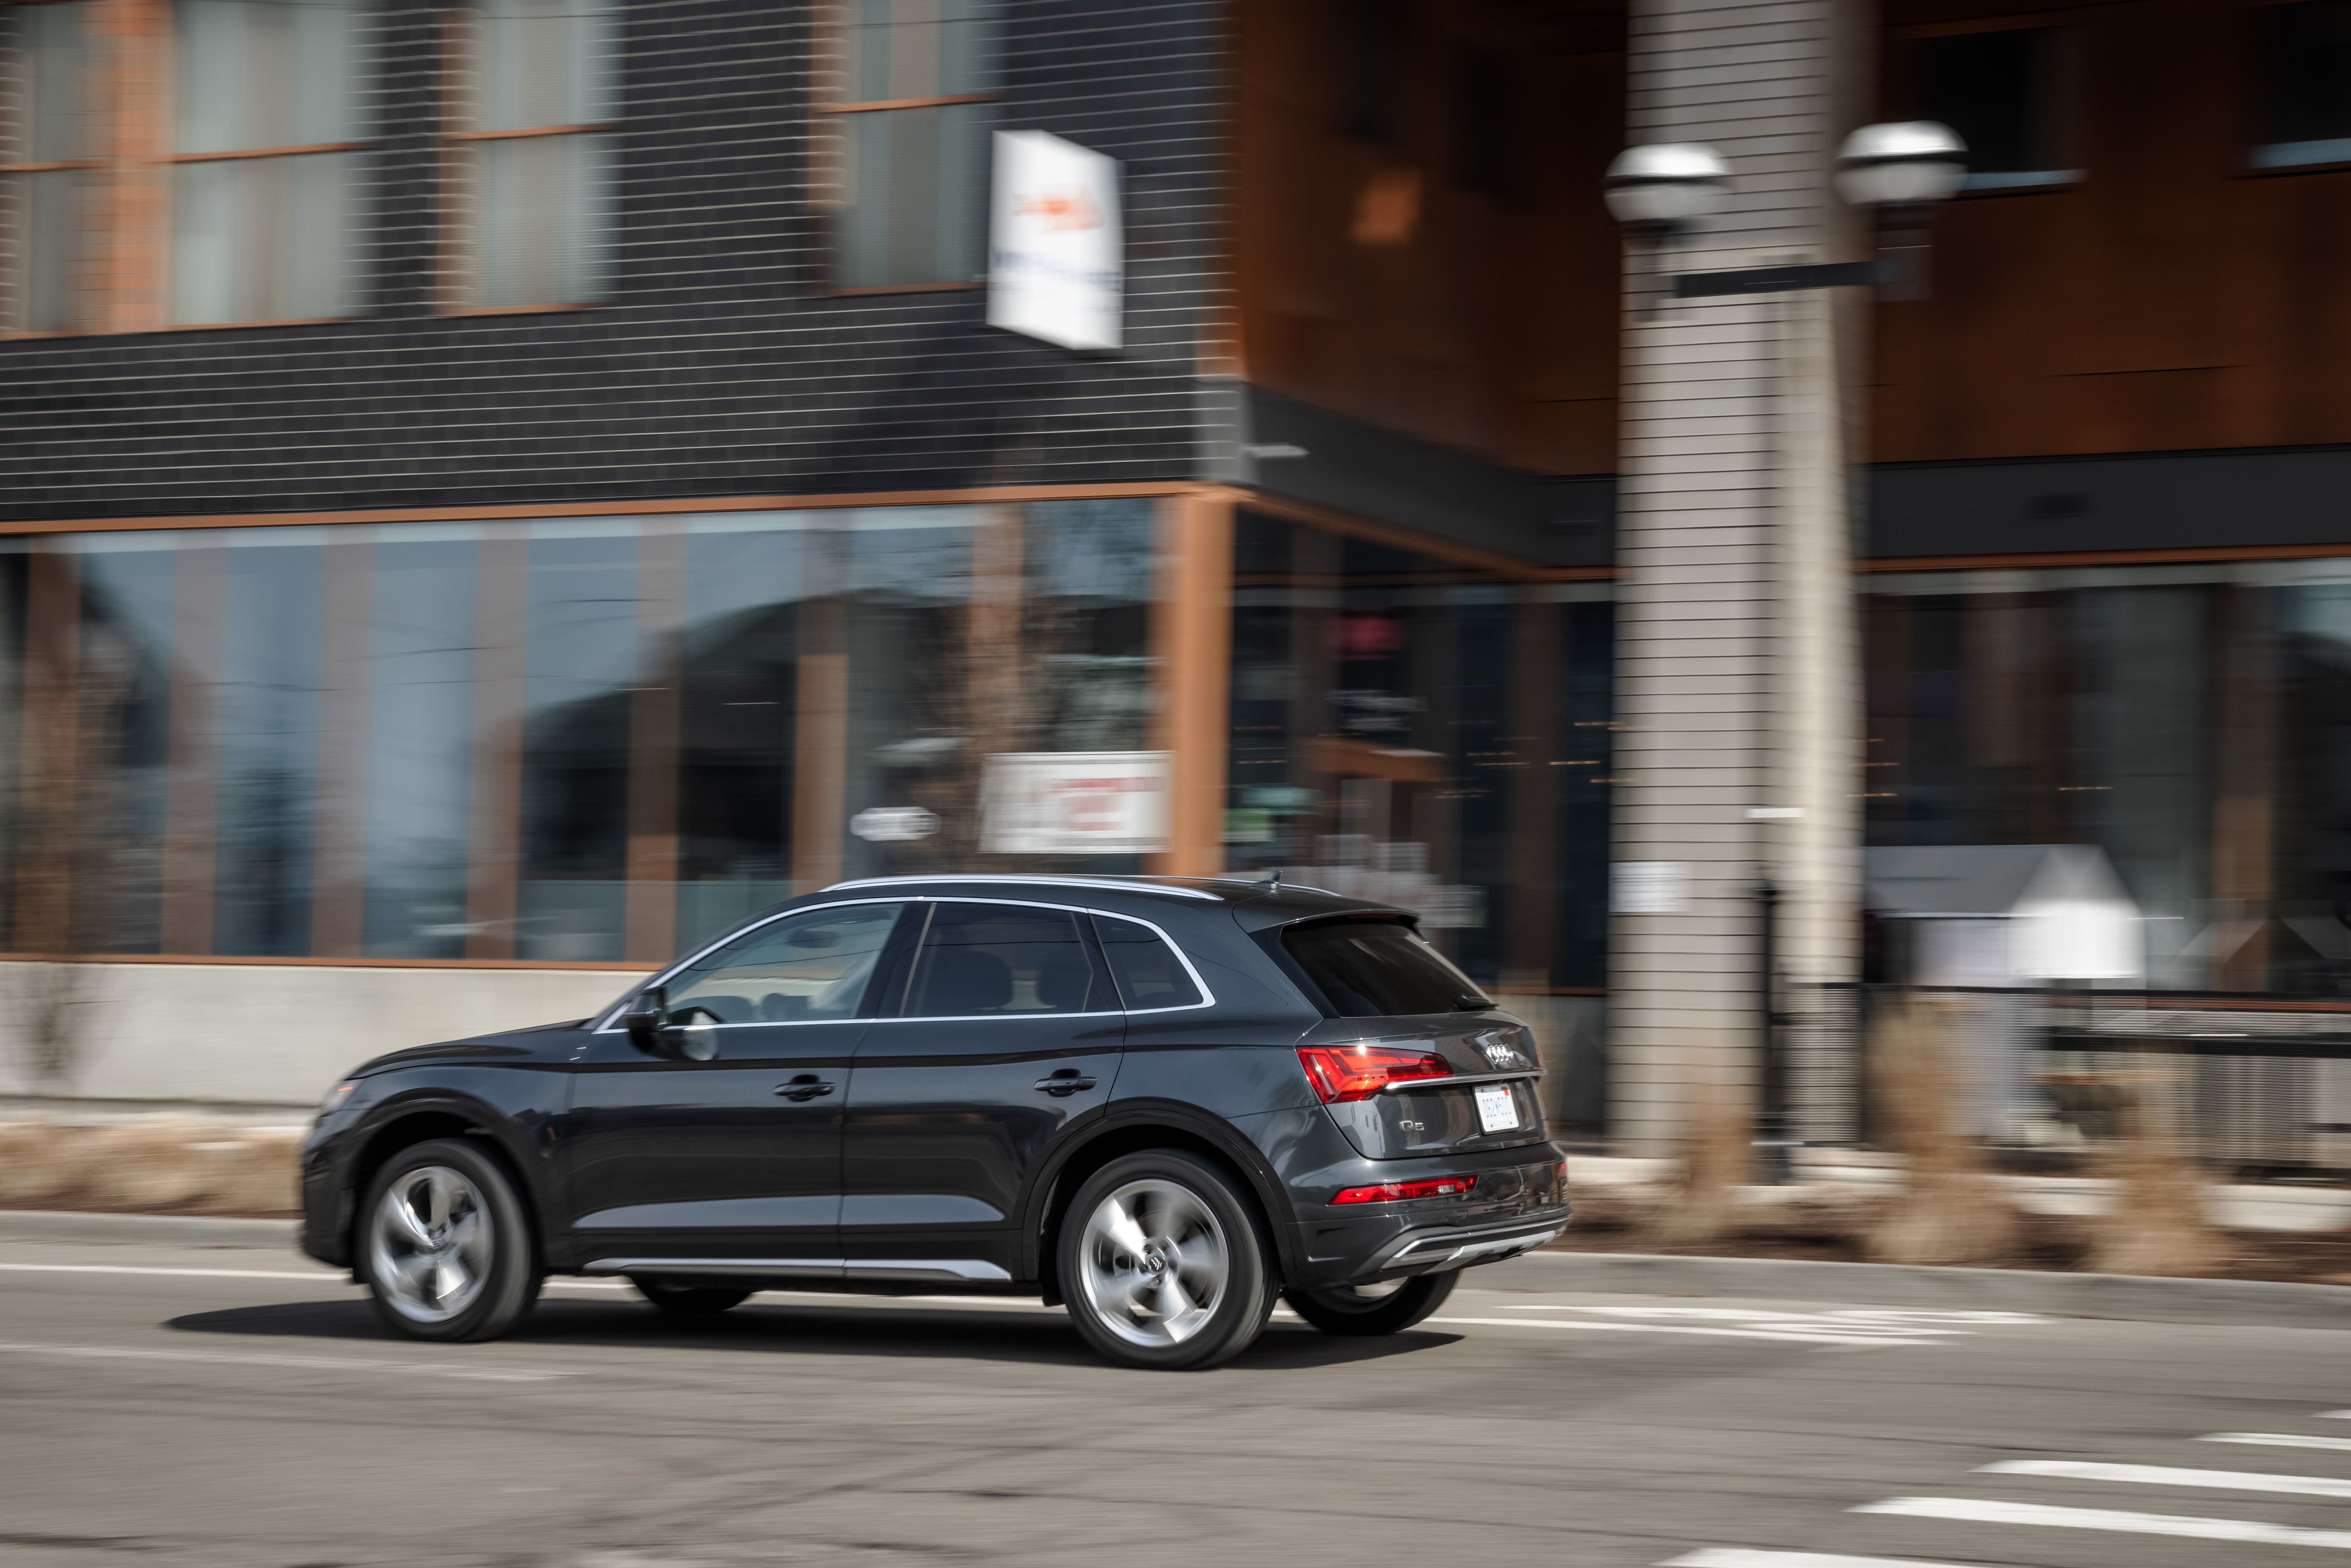 2021 Audi Q5 / Q5 Sportback Review, Pricing, and Specs